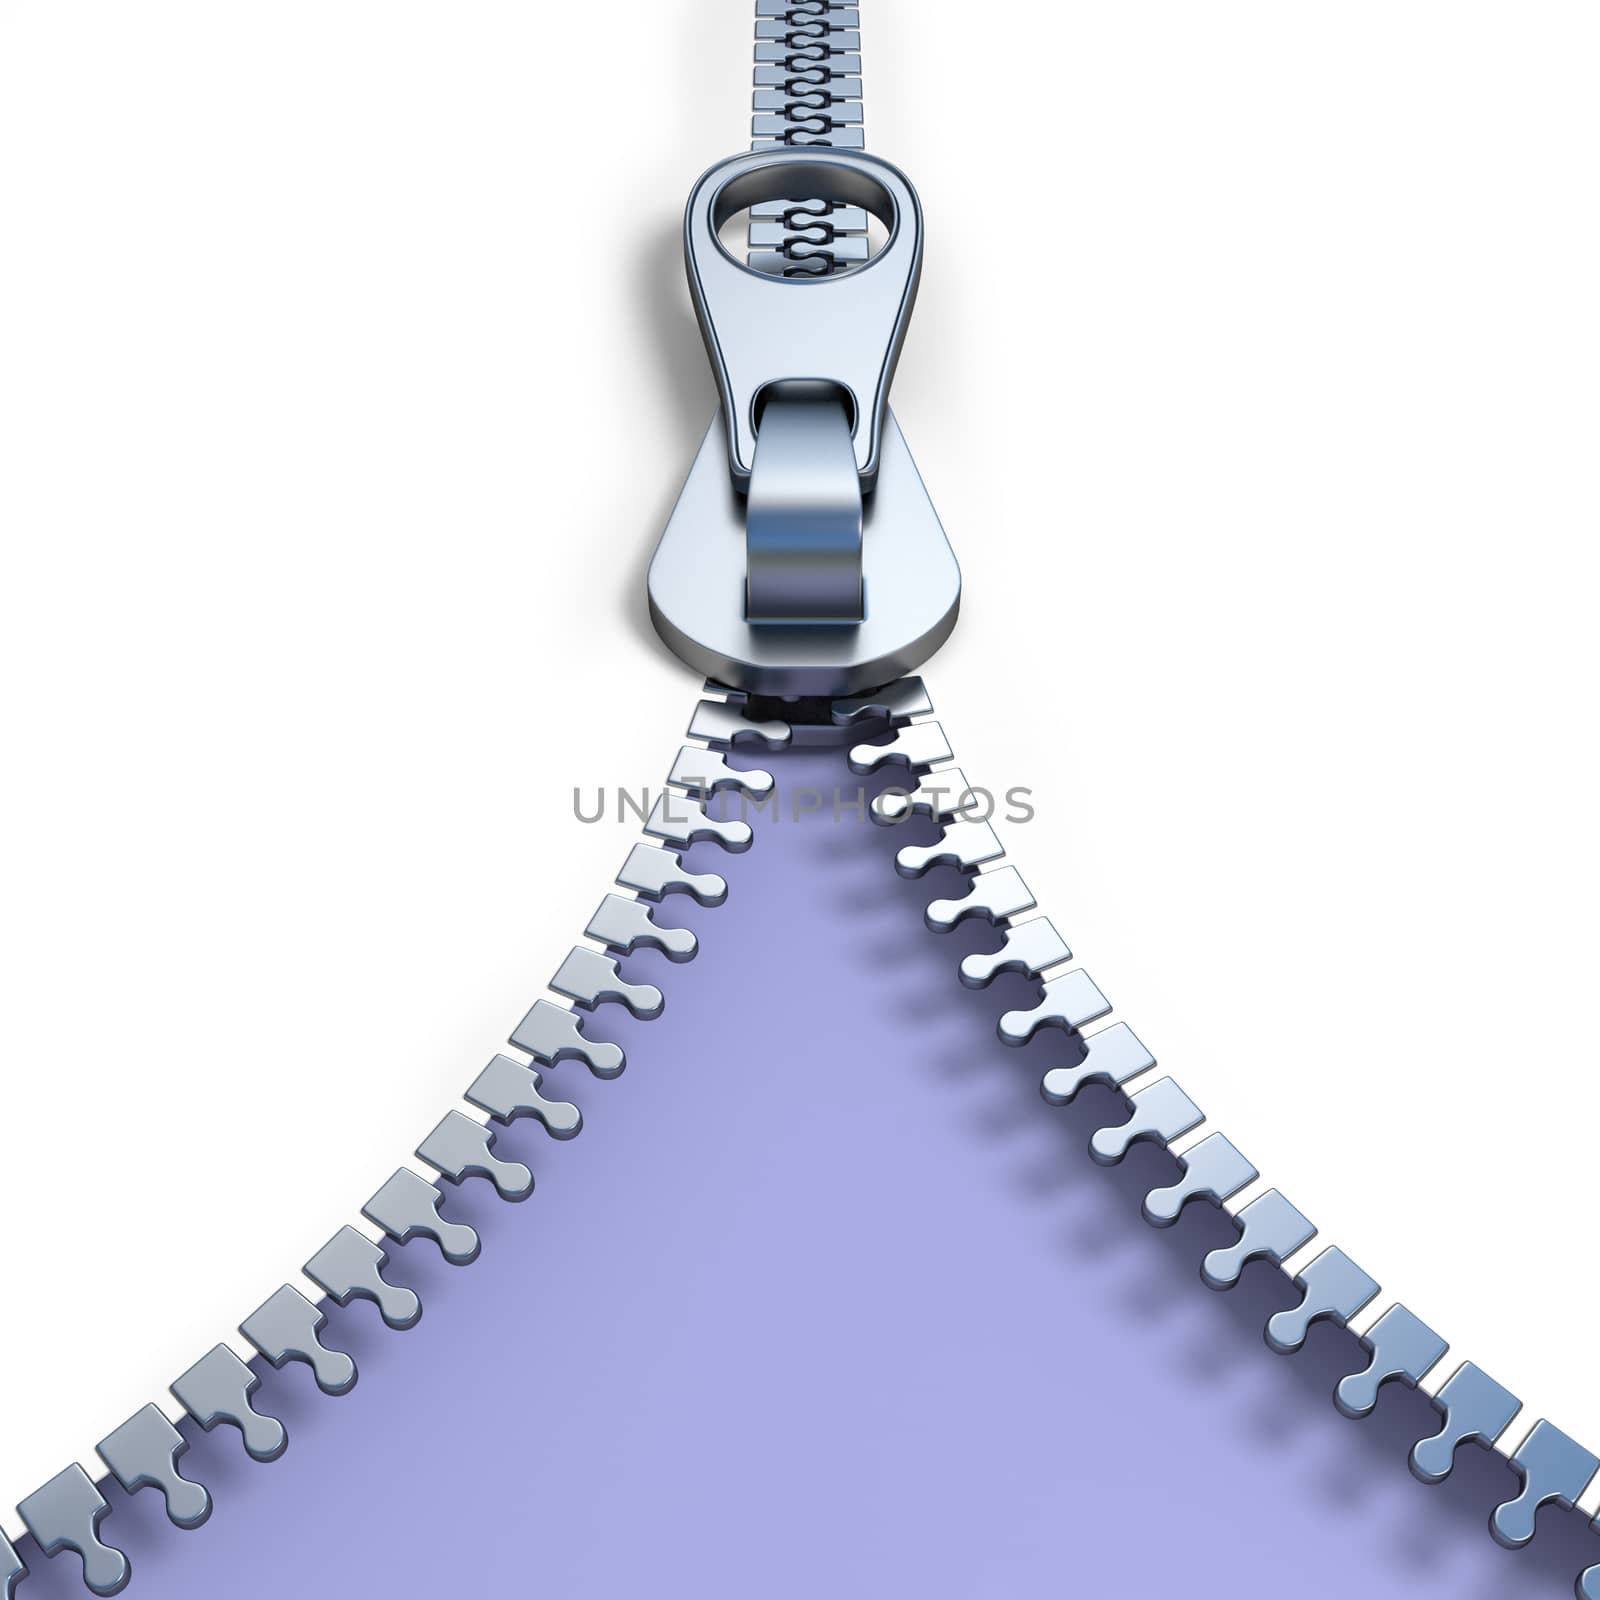 Metal zipper on purple background front view 3D render illustration isolated on white